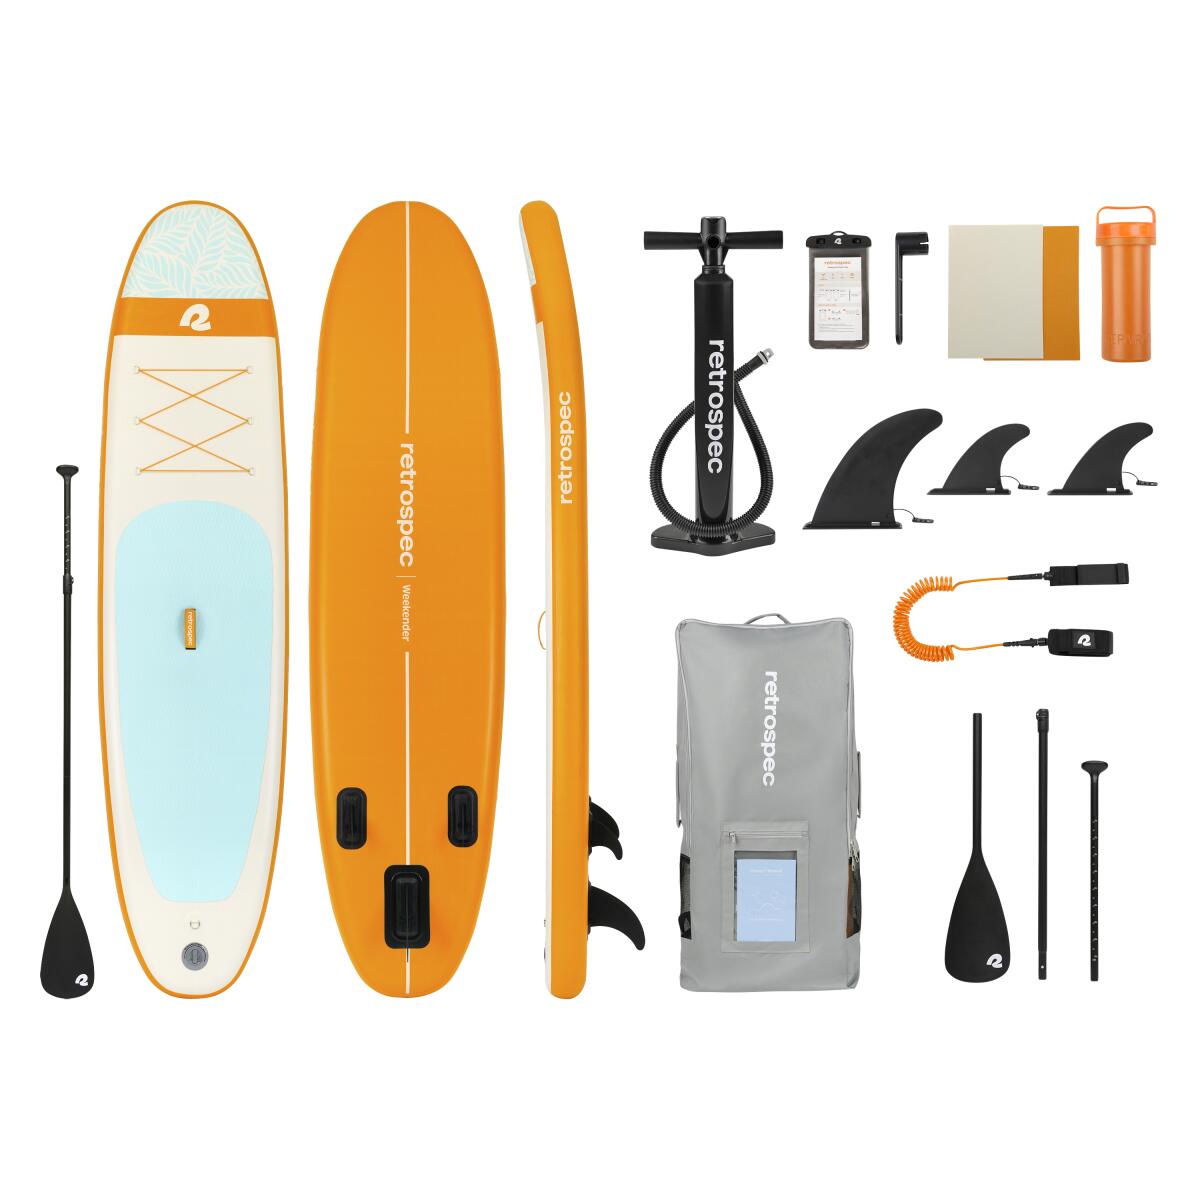 The Weekender Inflatable Paddleboard